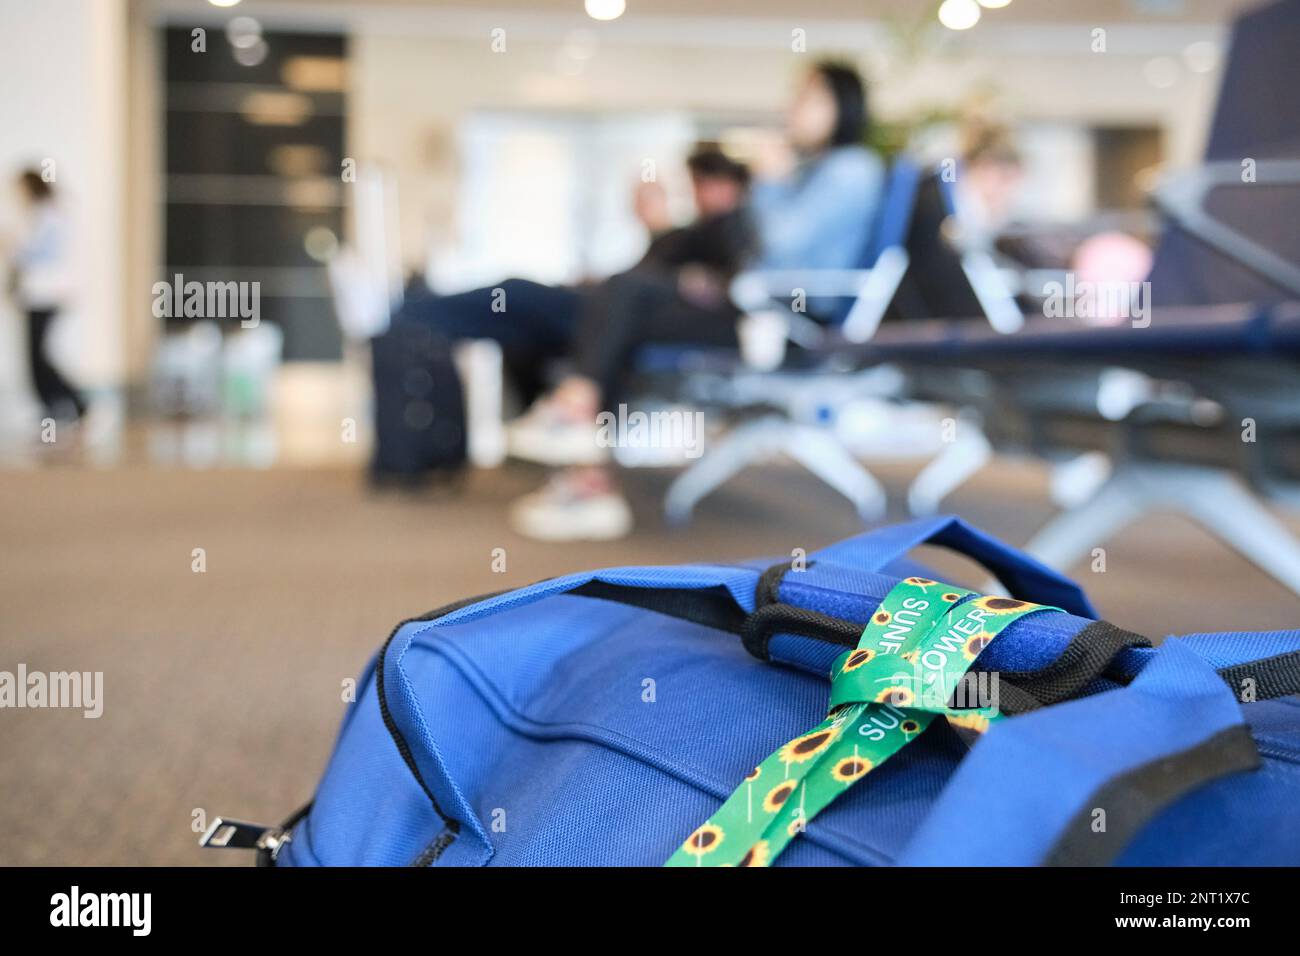 Lanyard of sunflowers, symbol of people with invisible or hidden disabilities, tied on a travel bag on the floor of an airport. Stock Photo